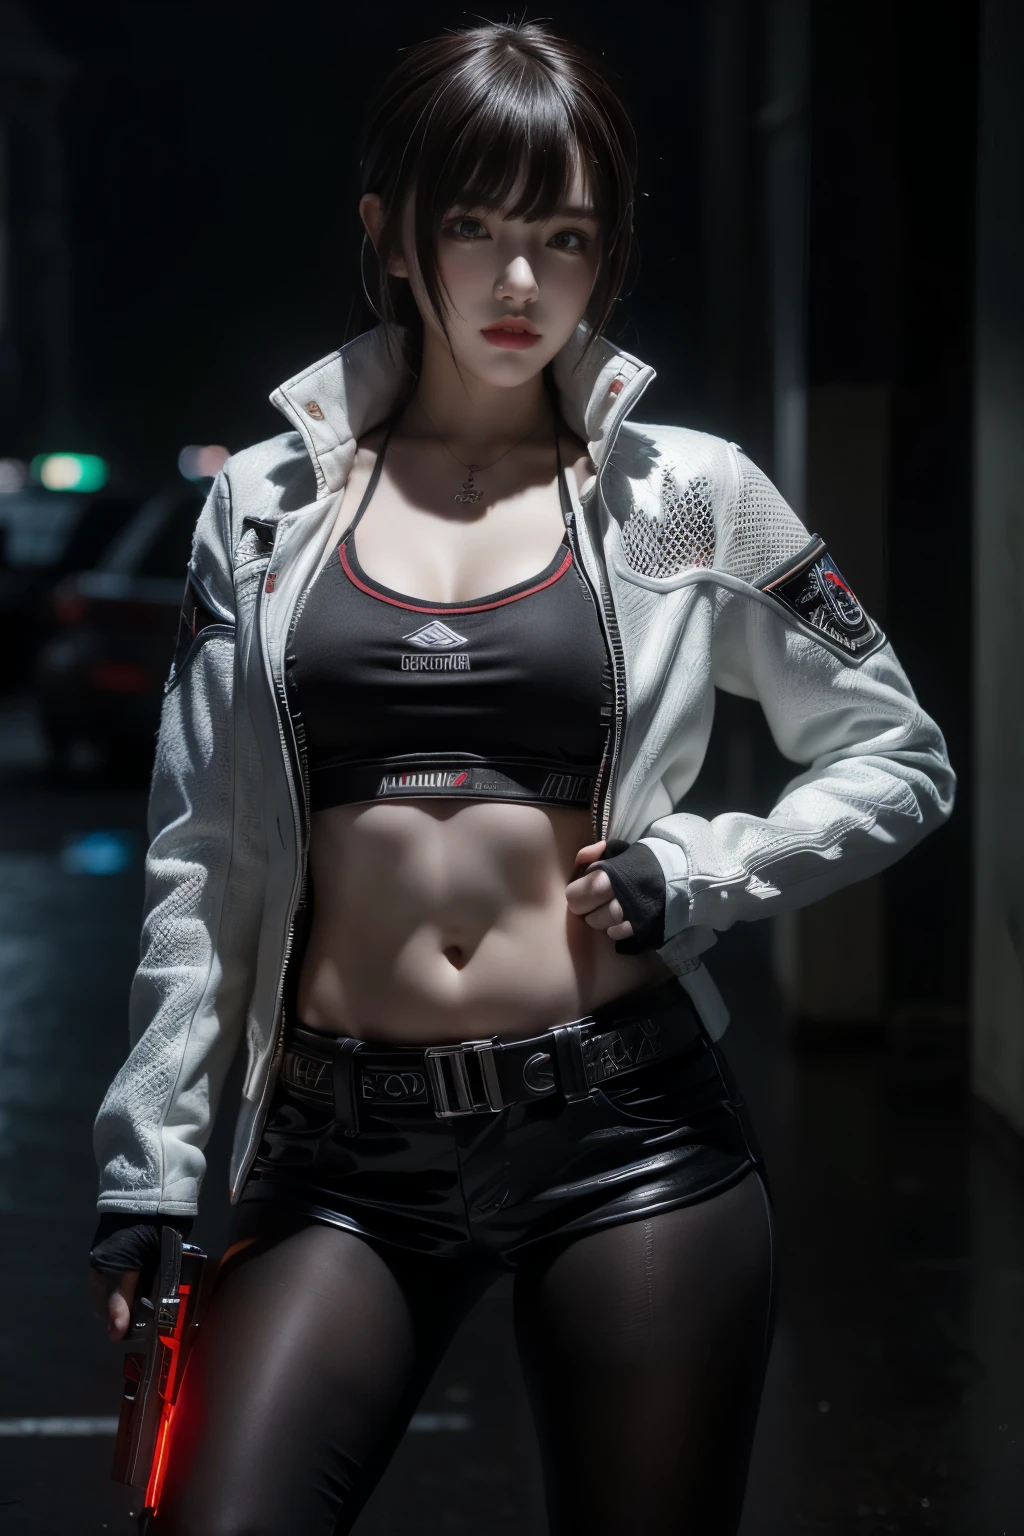 tmasterpiece,Best quality,A high resolution,8K,(Portrait photograph:1.5),(ROriginal photo),real photograph,digital photography,(Combination of cyberpunk and fantasy style),(Female soldier),20 year old girl,random hair style,By bangs,(Red eyeigchest, accessories,Redlip,(He frowned,Sneer),(Cyberpunk combined with fantasy style clothing,Openwork design,joint armor,police uniforms,White jacket,Red),exposing your navel,Photo pose,Realisticstyle,Thunder and lightning on rainy day,(Thunder magic),oc render reflection texture